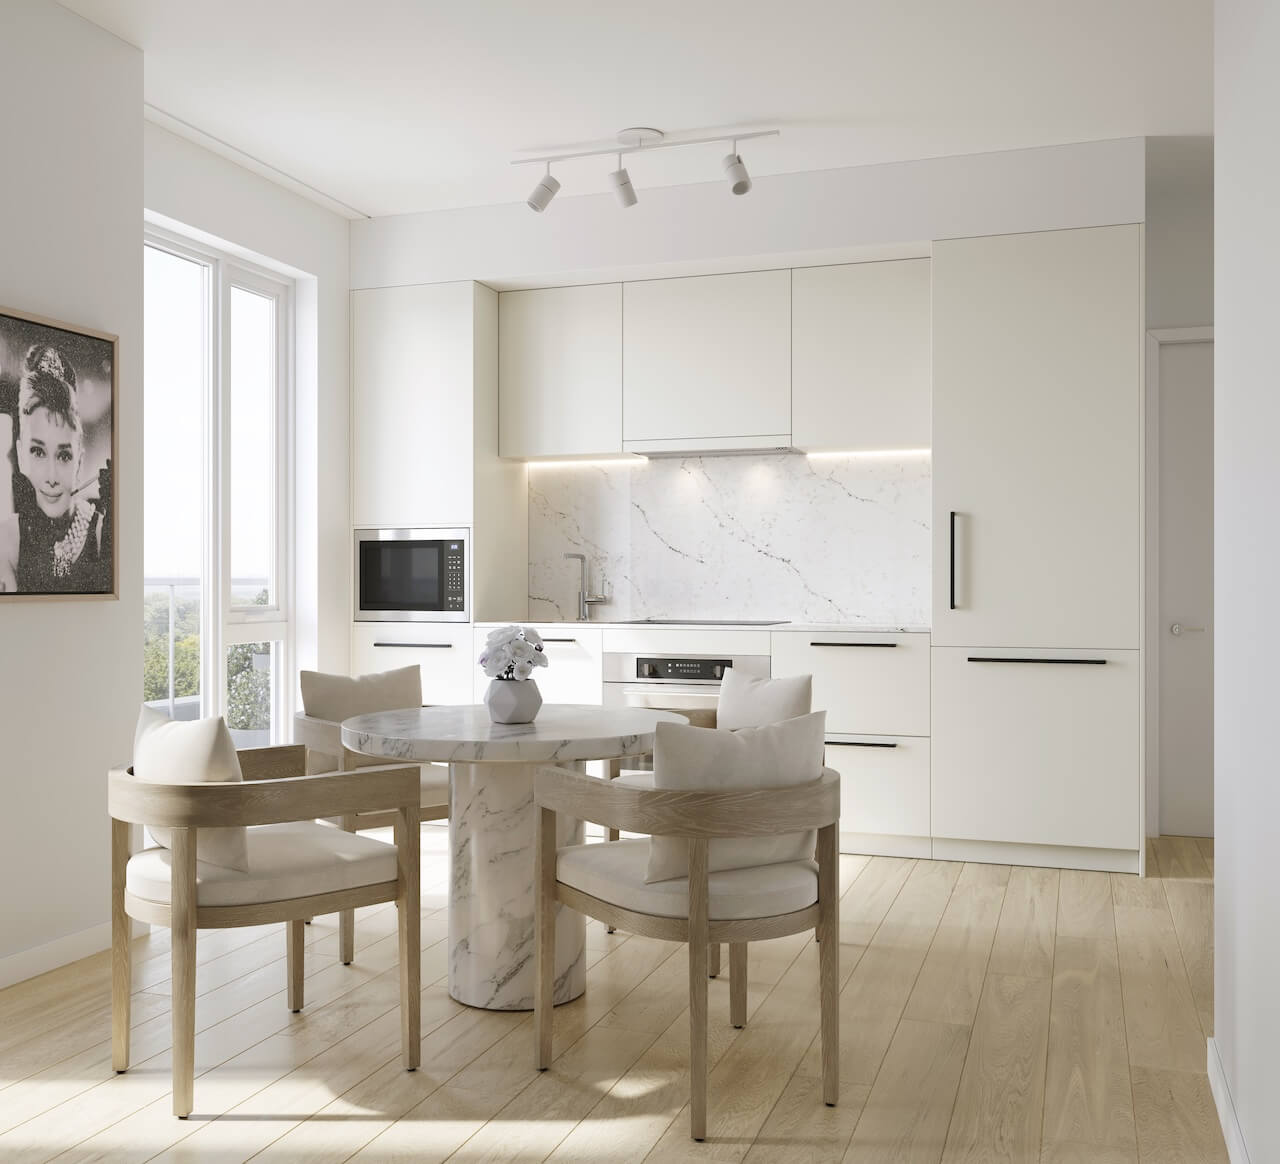 Rendering of The Leaside suite kitchen interior light